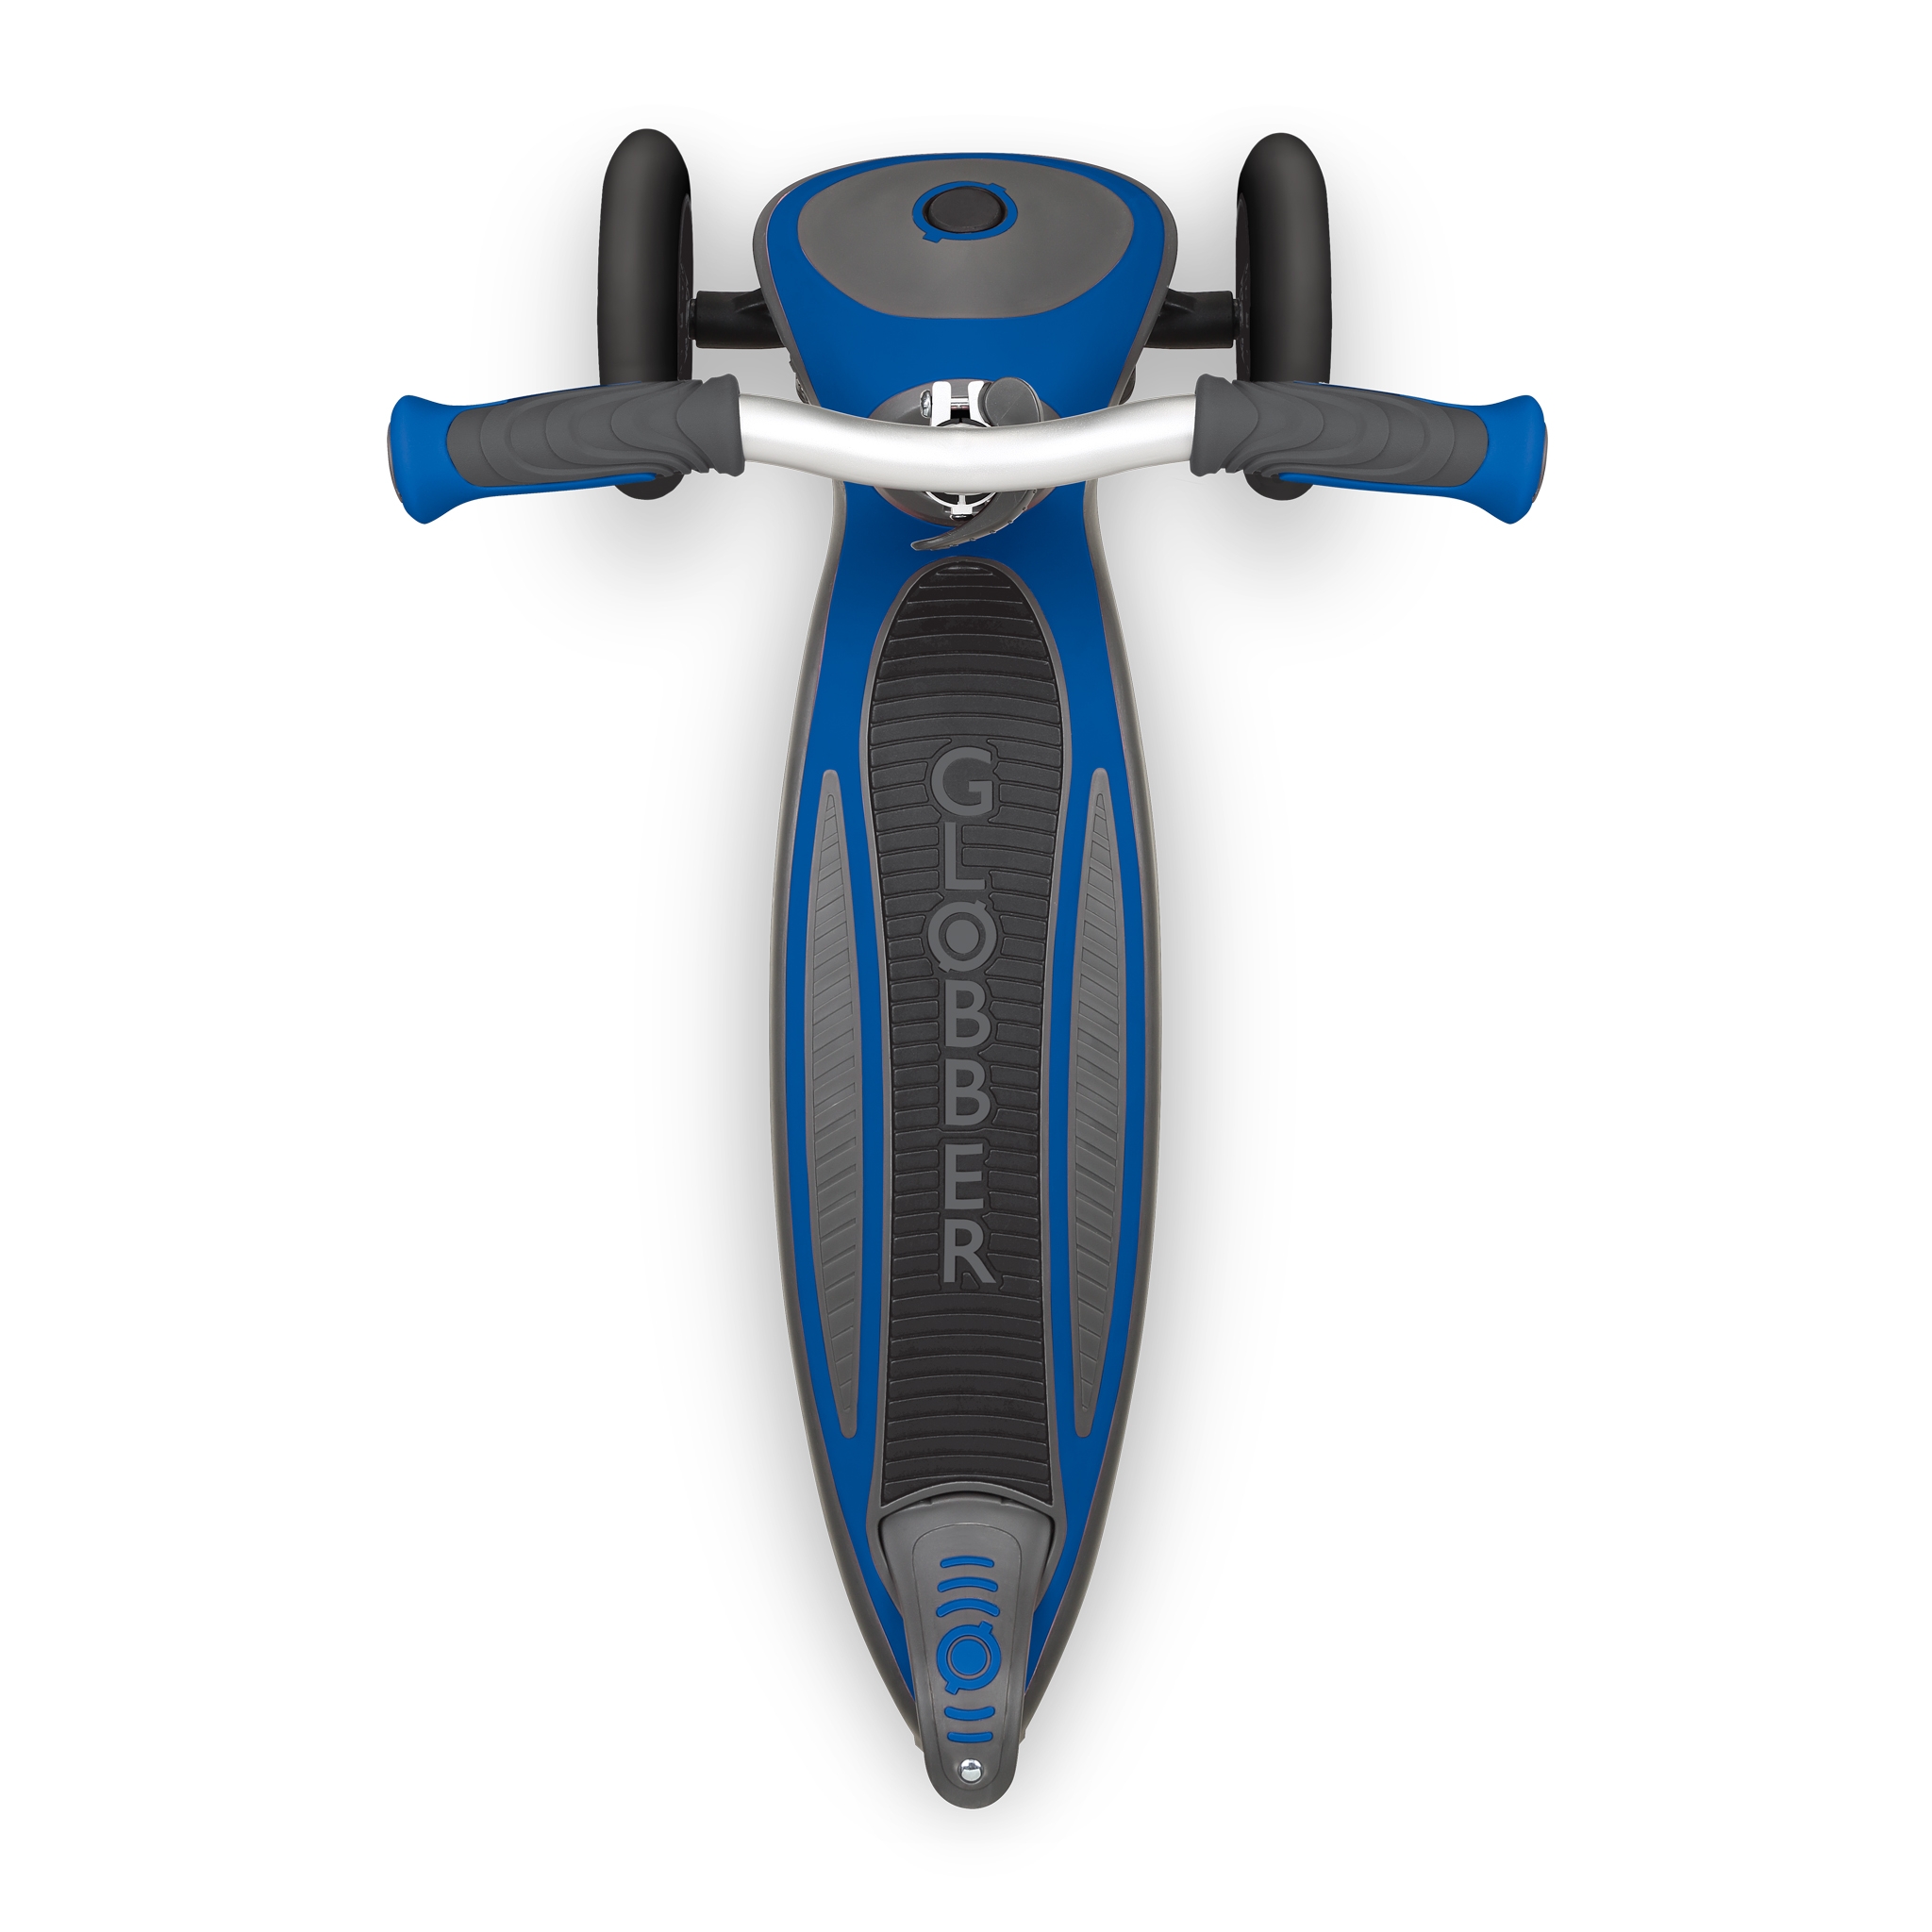 Globber-MASTER-3-wheel-foldable-scooter-for-kids-with-extra-wide-anti-slip-deck-for-comfortable-rides_dark-blue 0